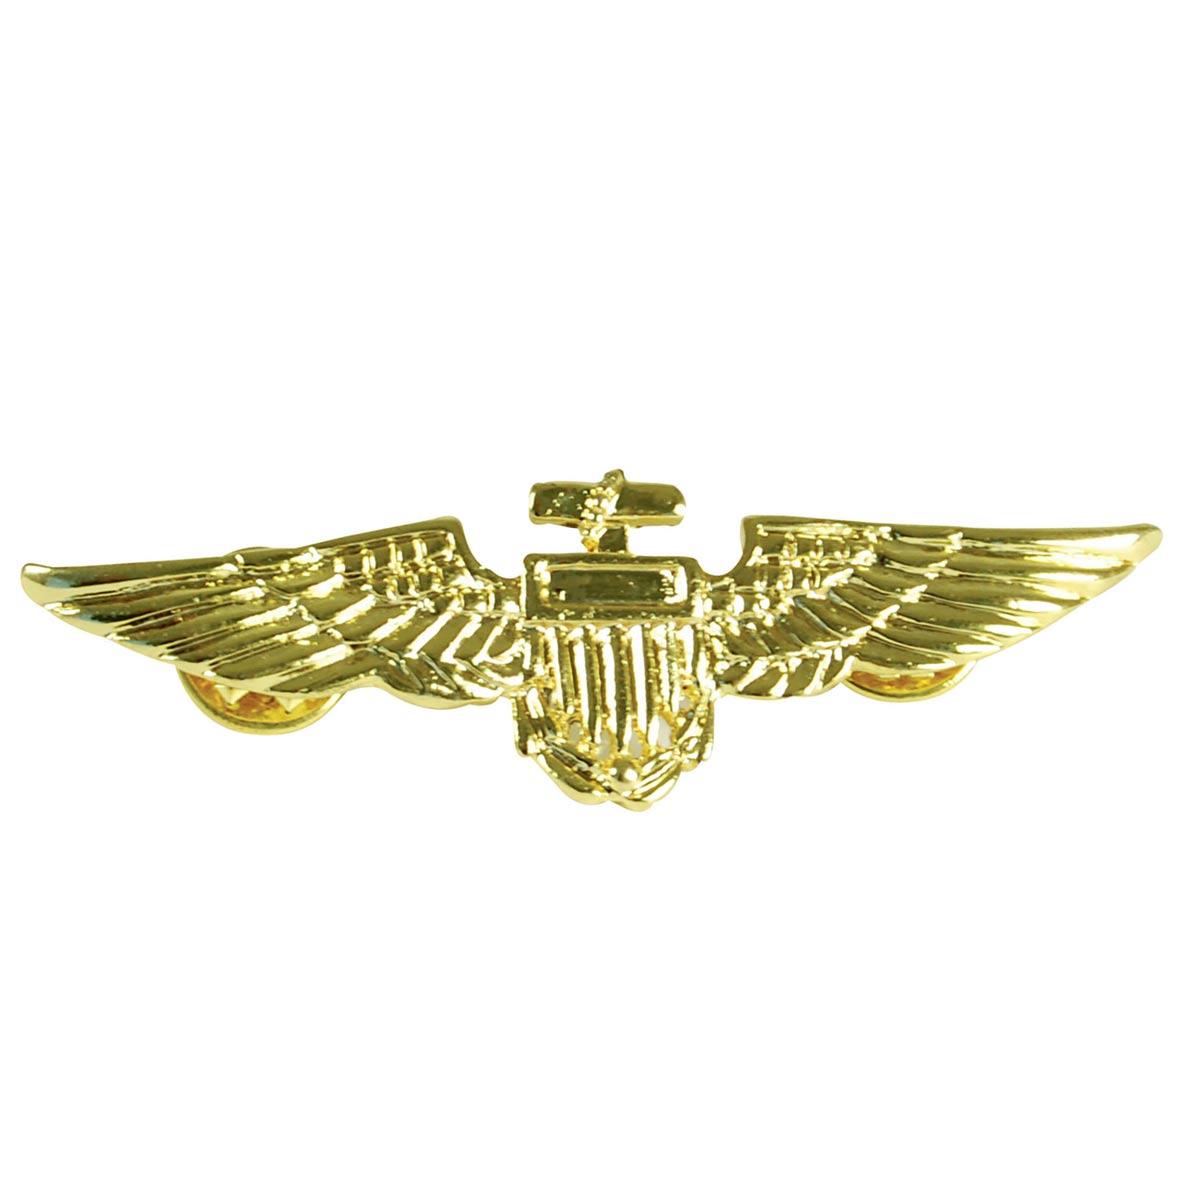 Aircrew or Aviator's Metal Pin Badge by B Novs BA027 available here at Karnival Costumes online party shop